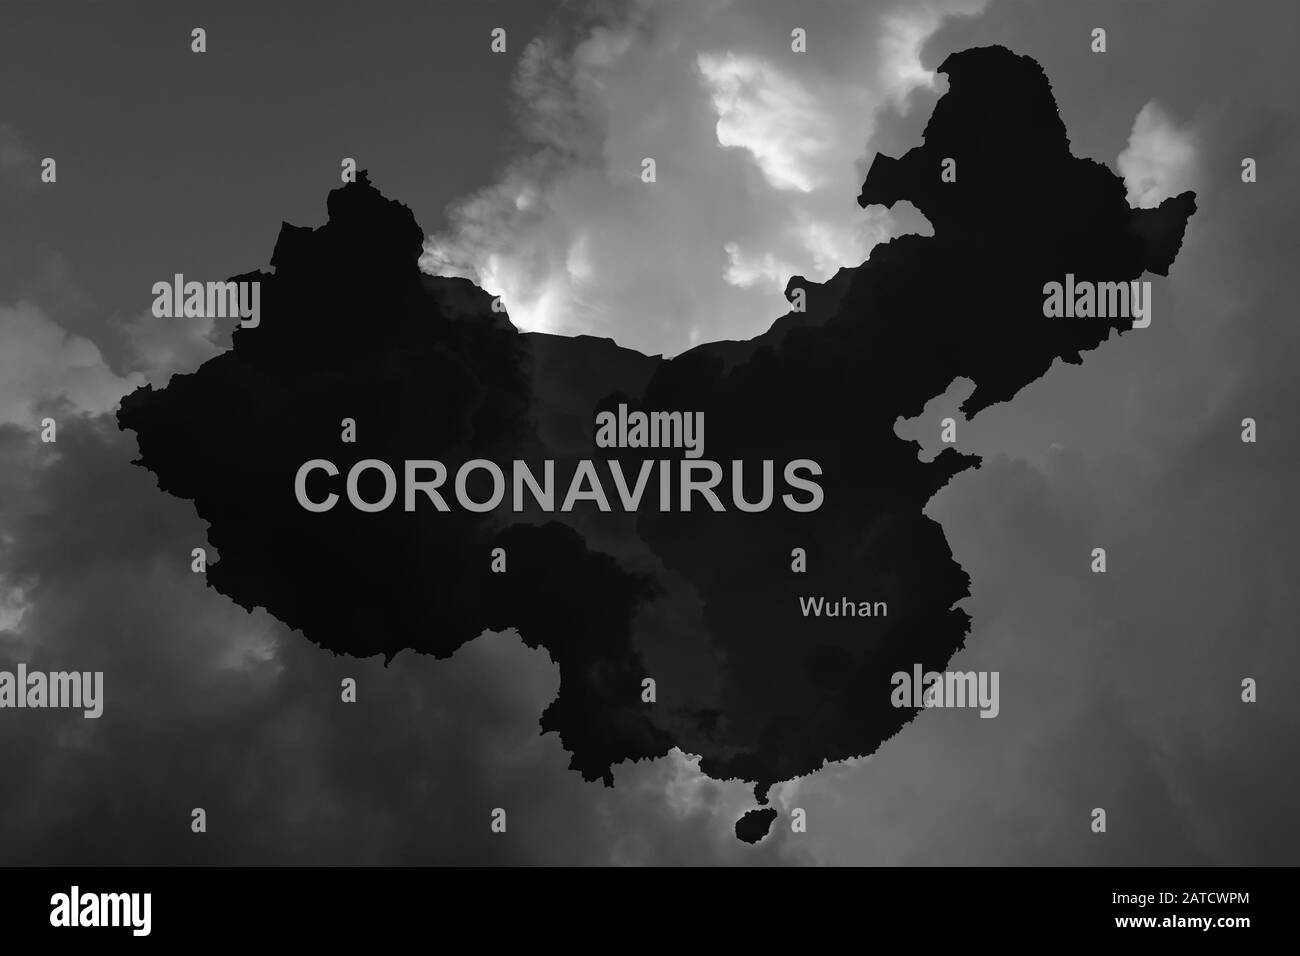 Corona Virus sign and the map country silhouette of China Stock Photo